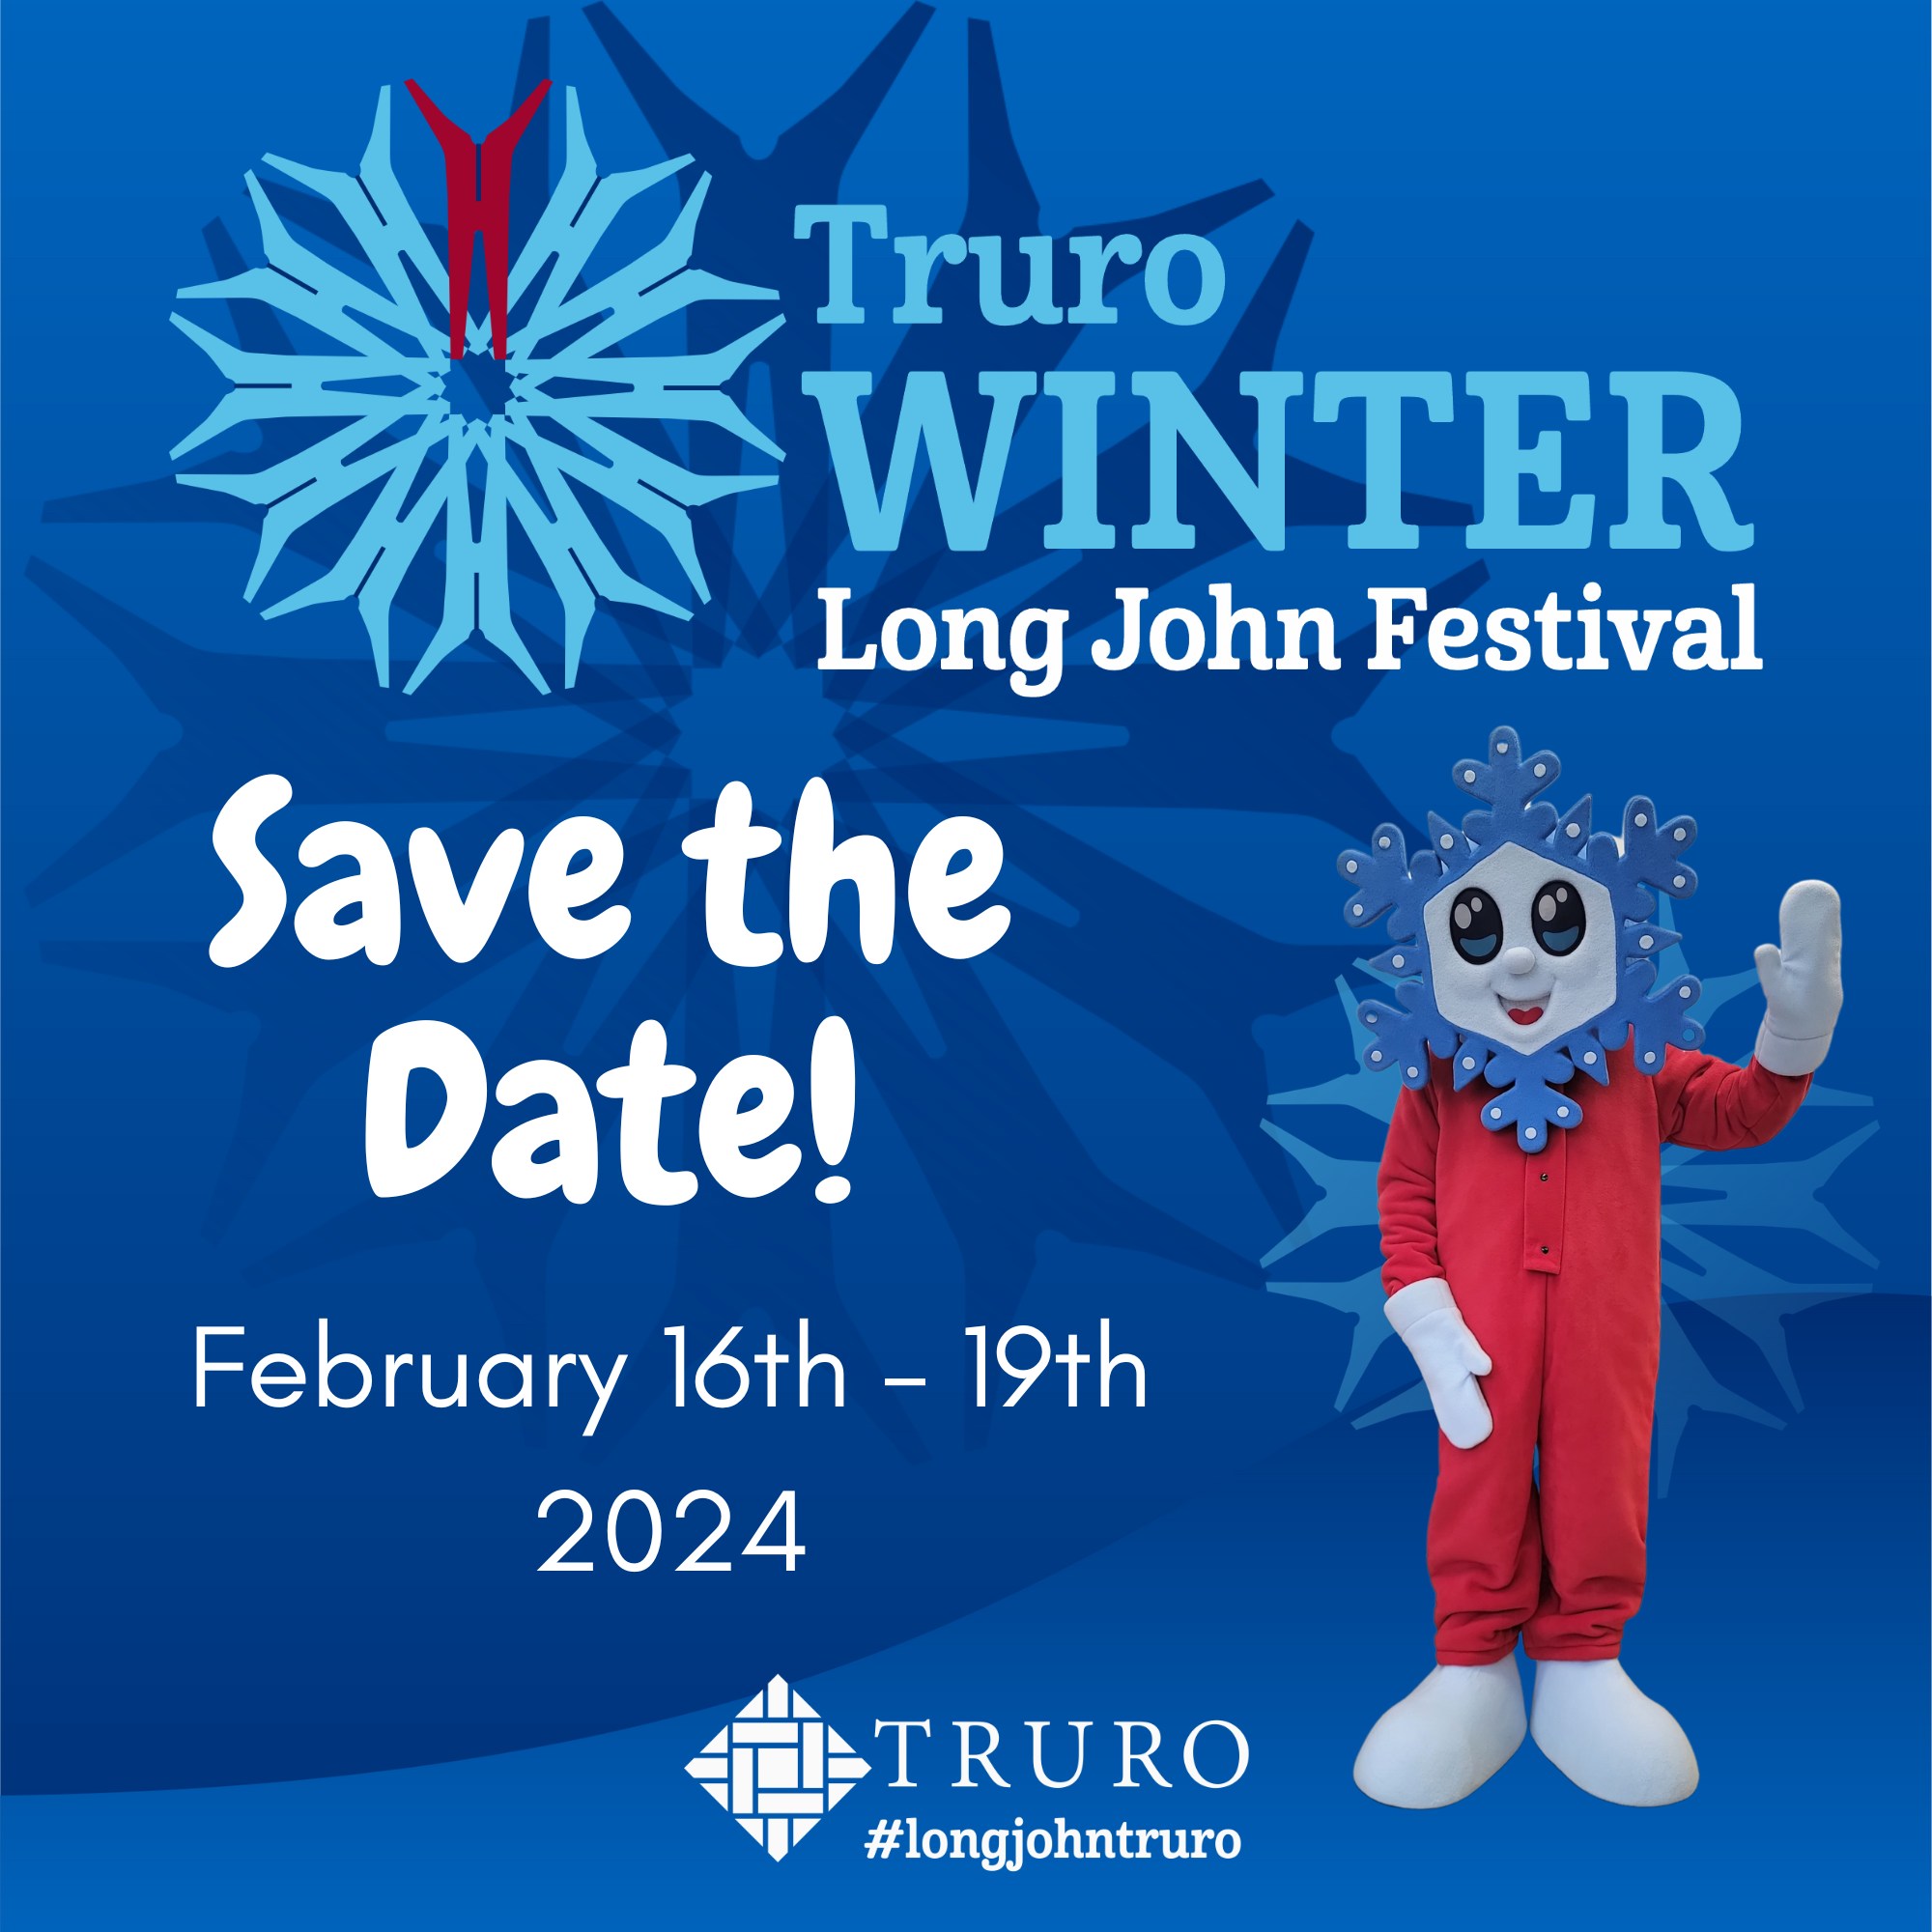 Save the date Feb 16-19, 2024.